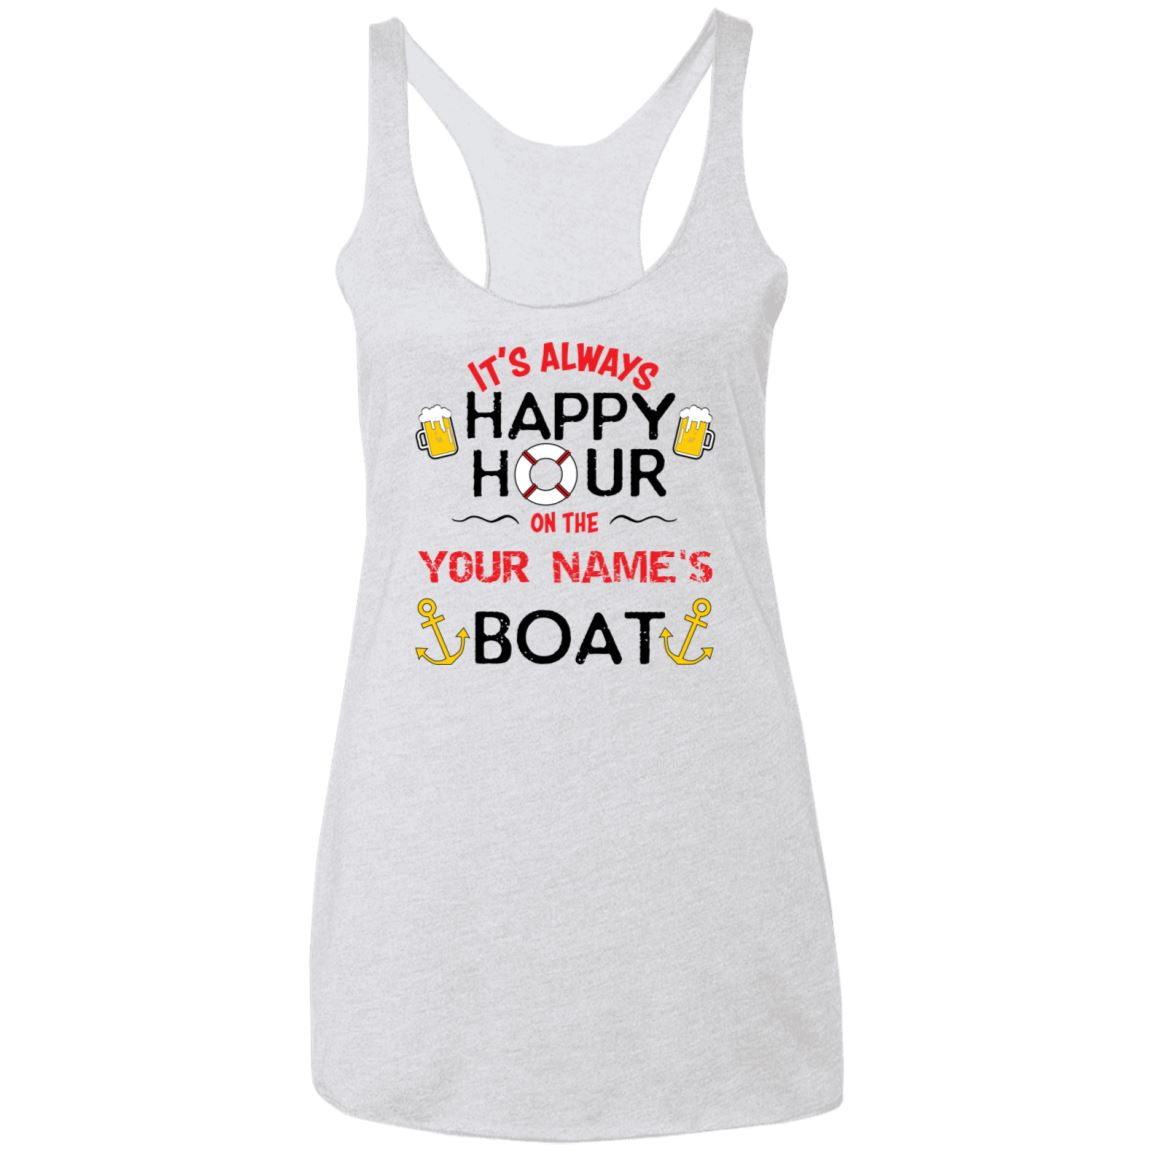 It's Always Happy Hour On Your Boat NL6733 Ladies' Triblend Racerback Tank - Houseboat Kings